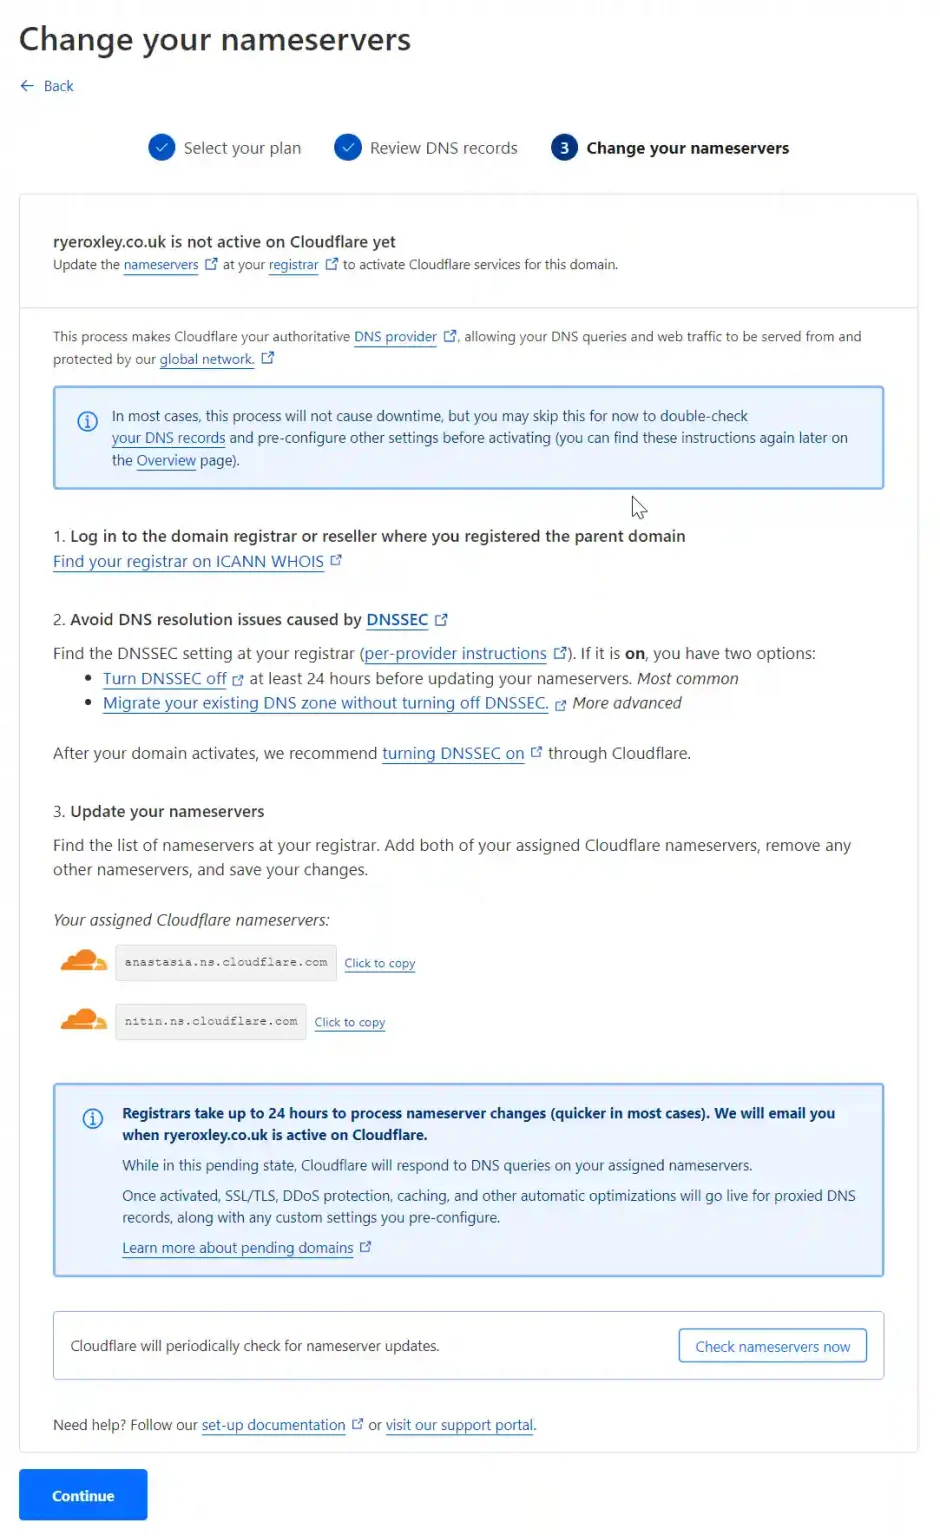 A Cloudflare setup page instructing to change nameservers for the domain ryeroxley.co.uk, with steps provided and assigned Cloudflare nameservers listed.